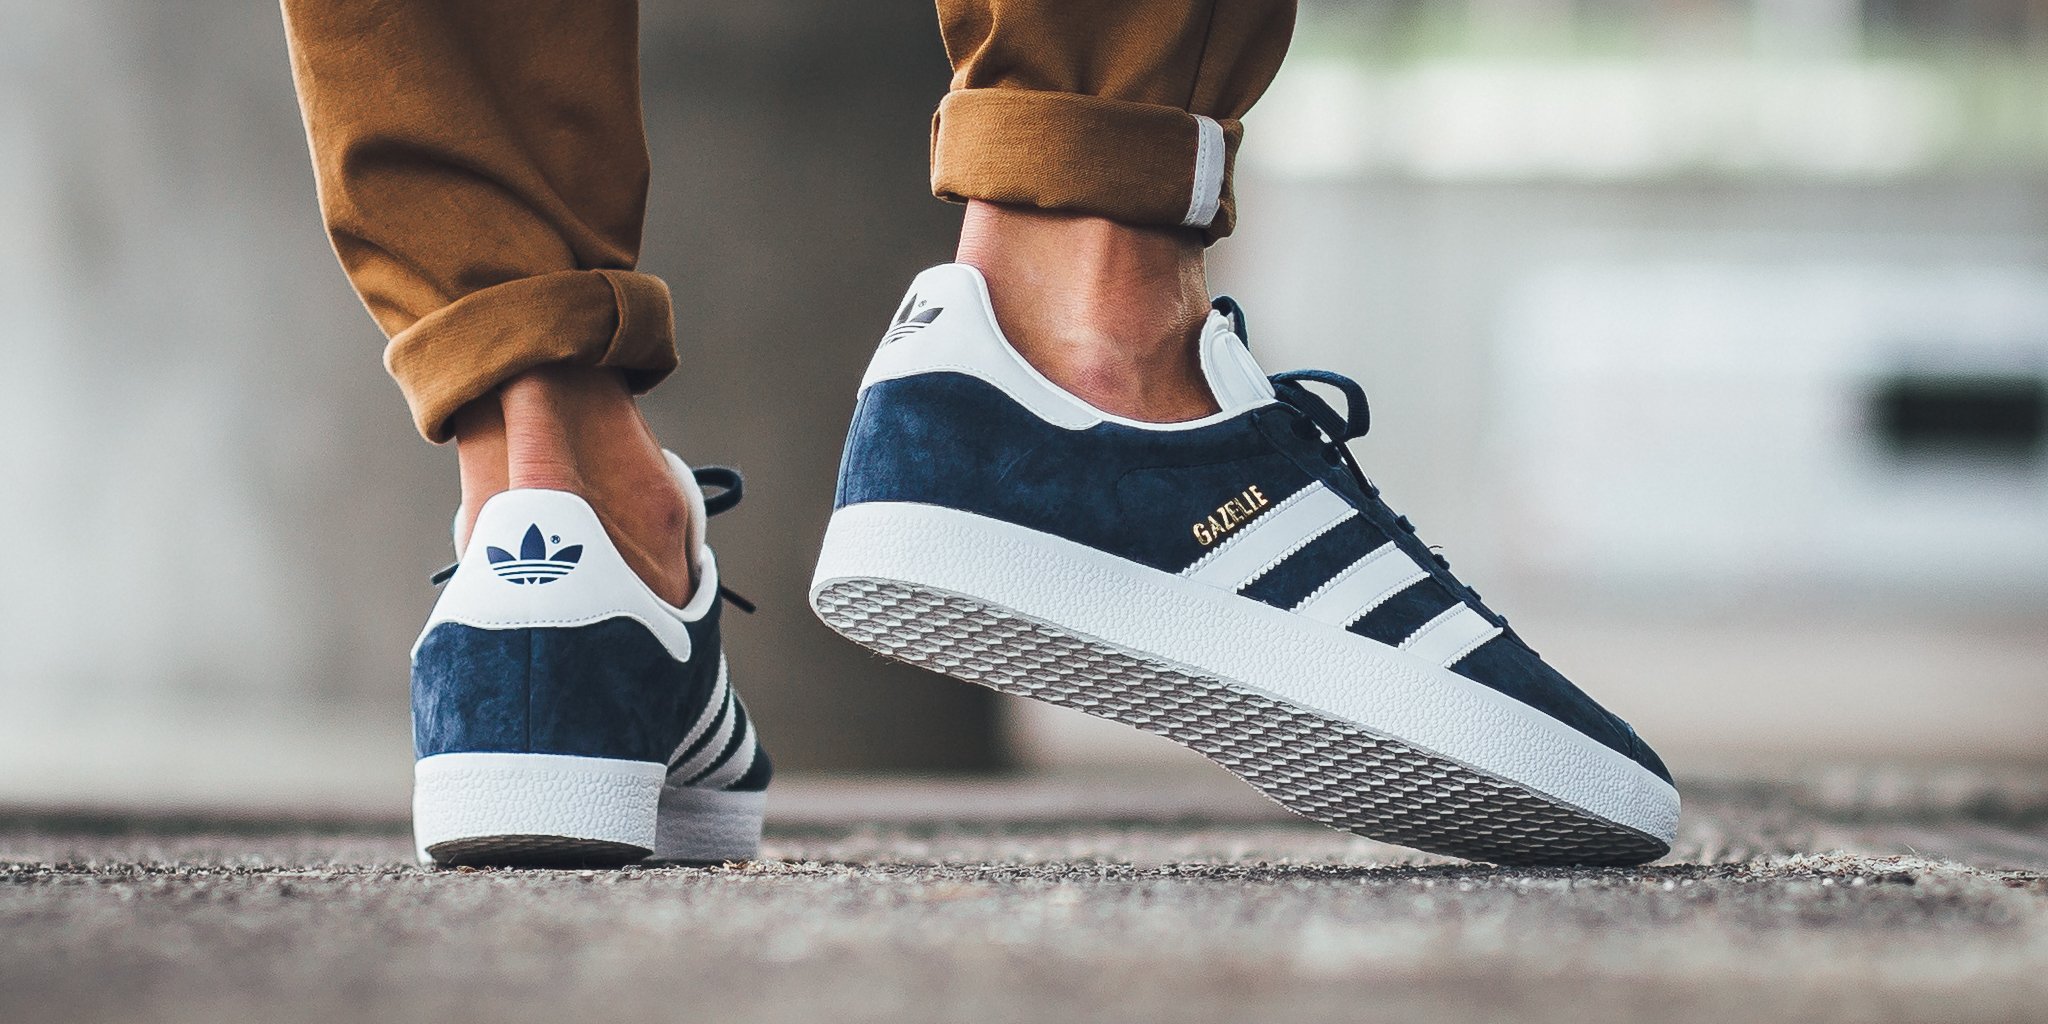 Titolo Twitter: "ONLINE NOW Adidas Gazelle - Collegiate Navy/White LINK: https://t.co/byqlM8MpEU https://t.co/rWBA9s97Md" Twitter